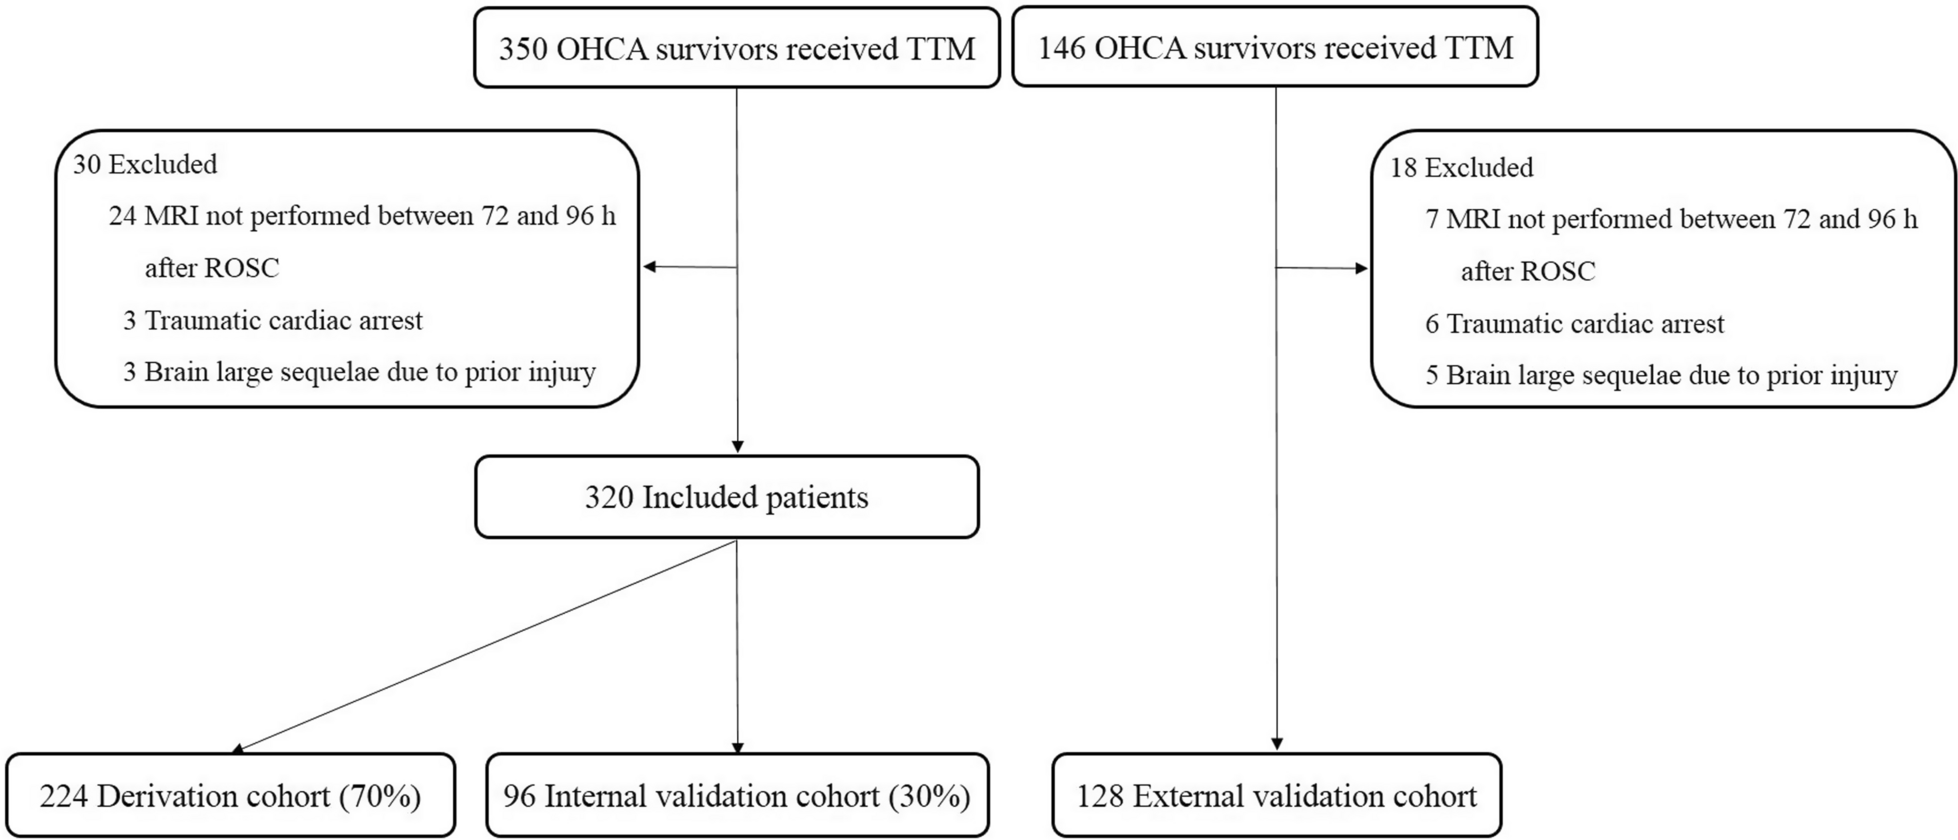 Quantitative analysis of apparent diffusion coefficients to predict neurological prognosis in cardiac arrest survivors: an observational derivation and internal–external validation study